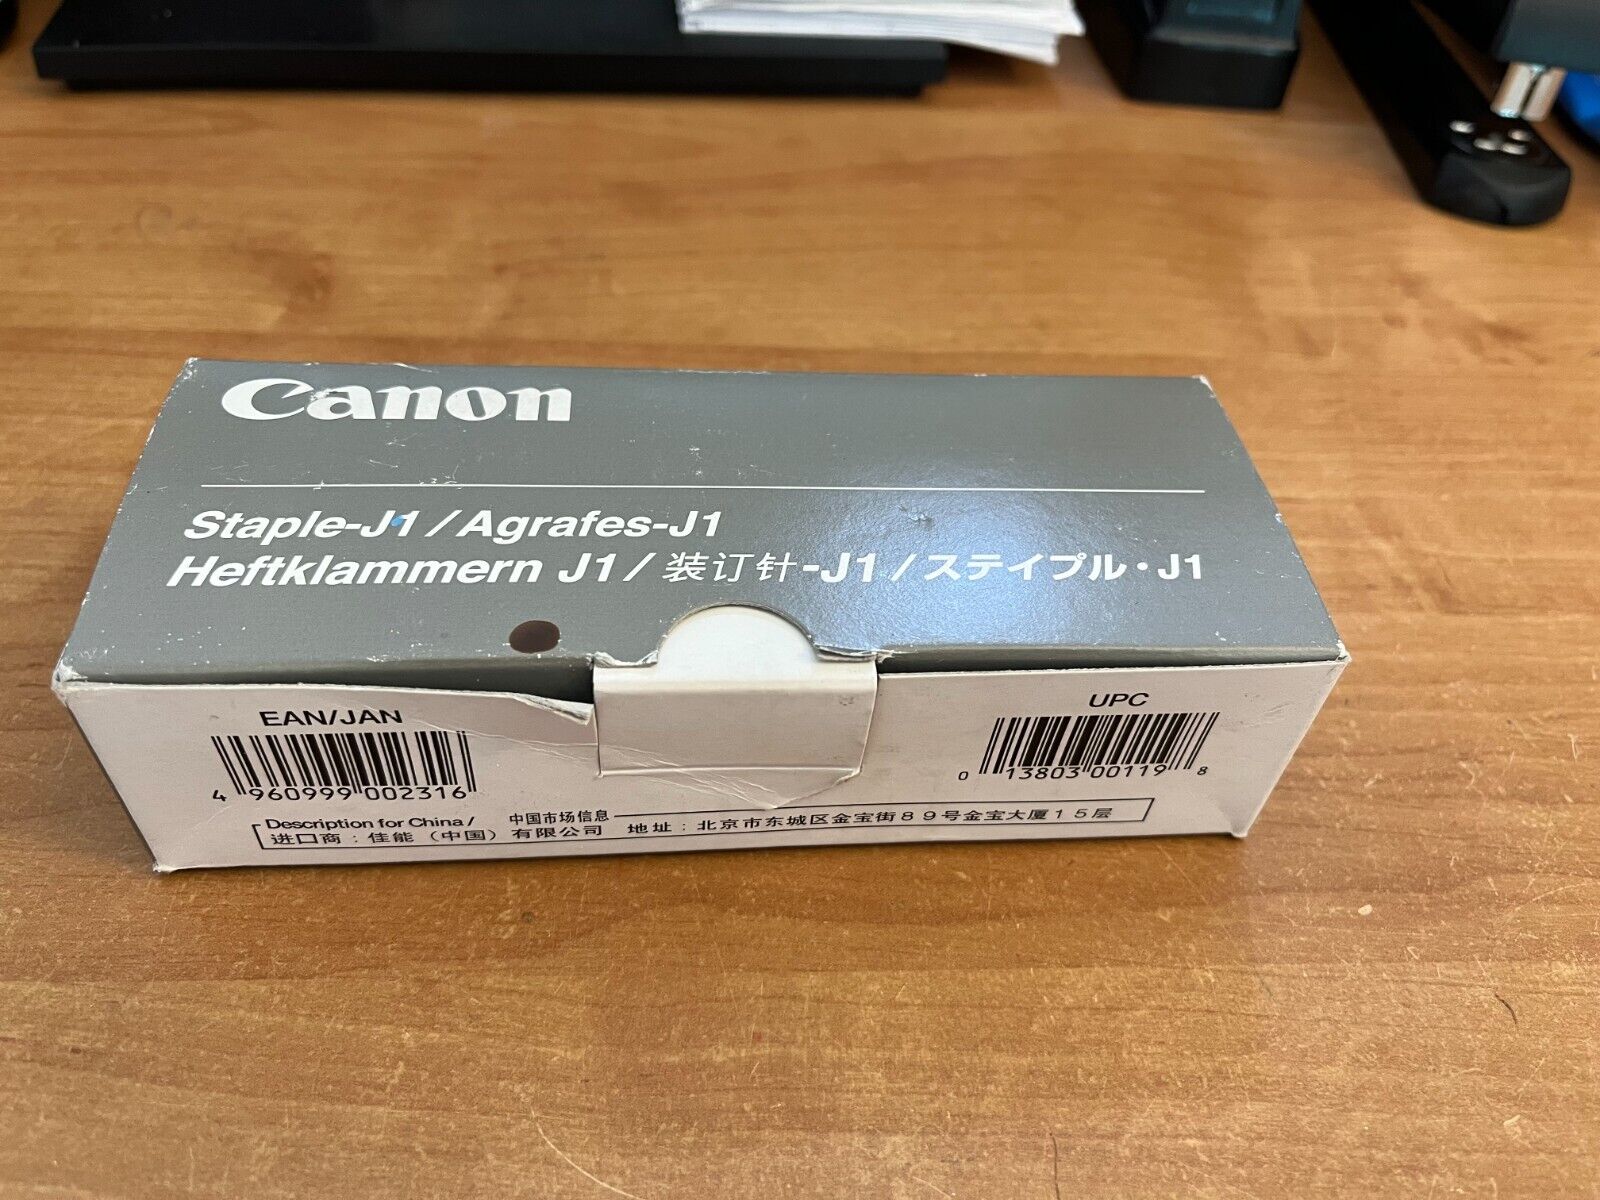 3-Pack Canon Staple Cartridges, J1, 6707A001(AA), for Canon Copiers w/ Staplers